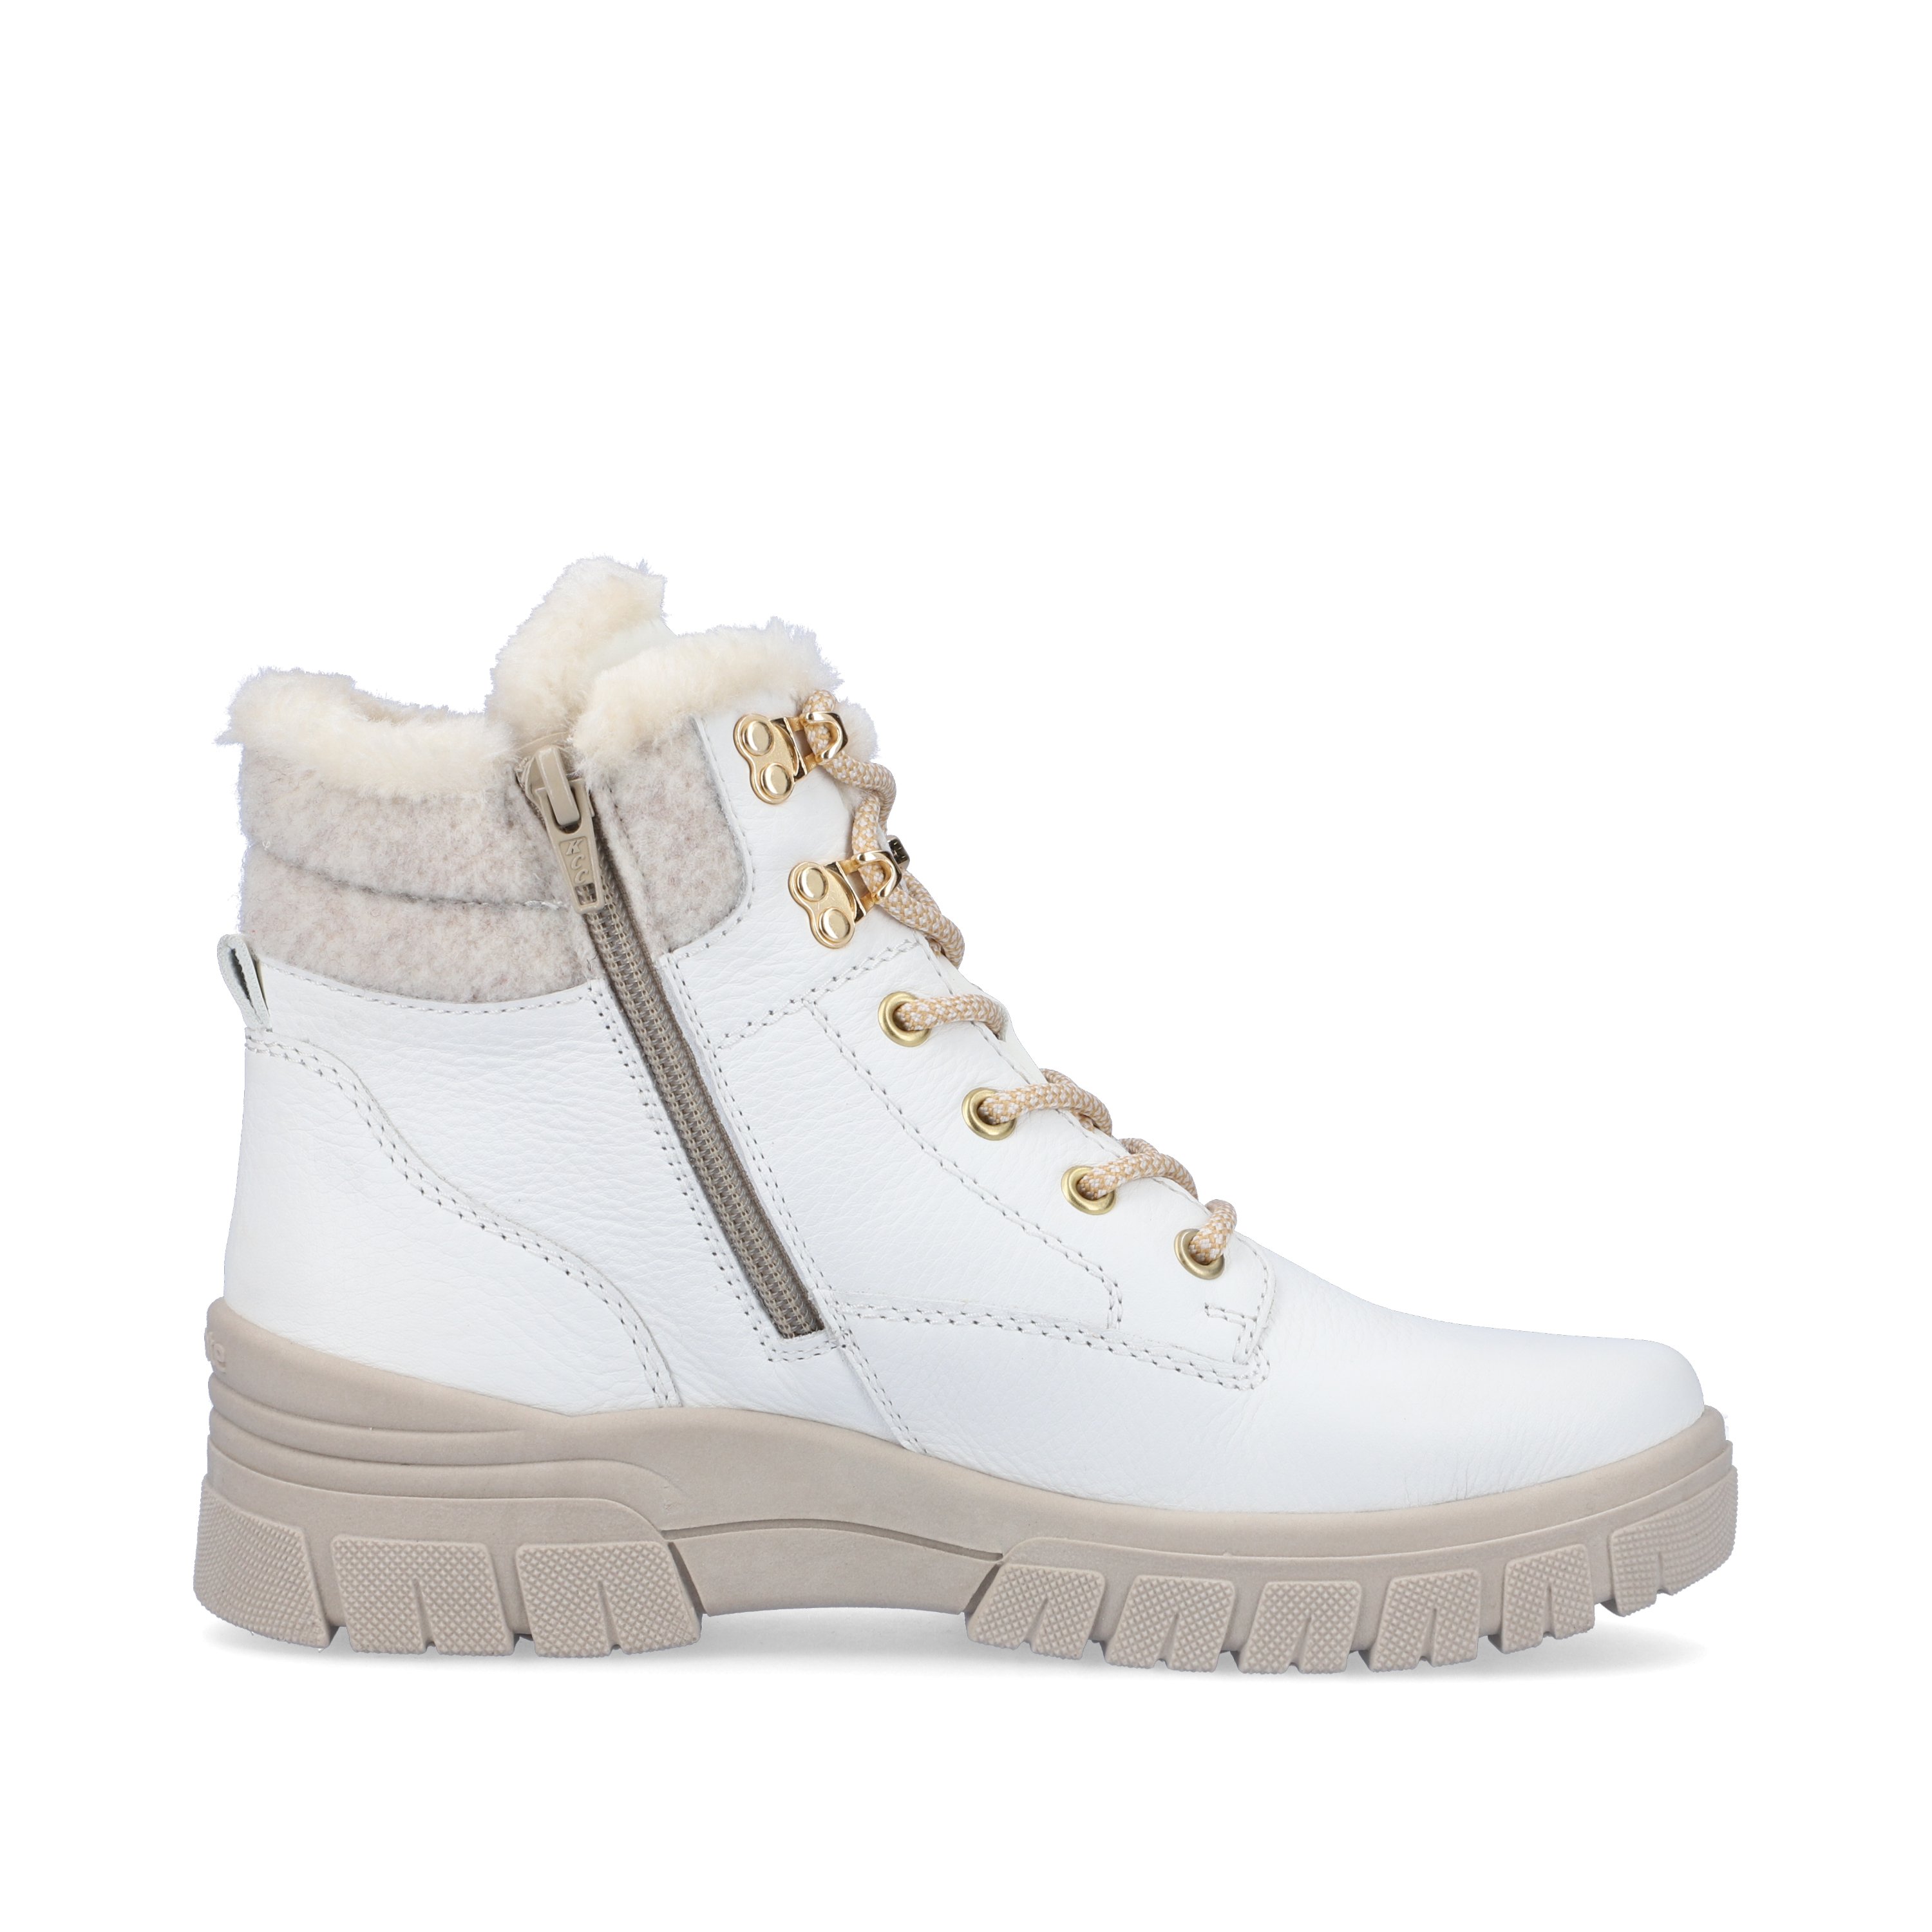 Off-white remonte women´s lace-up boots D0E71-80 with lacing and zipper. Shoe inside